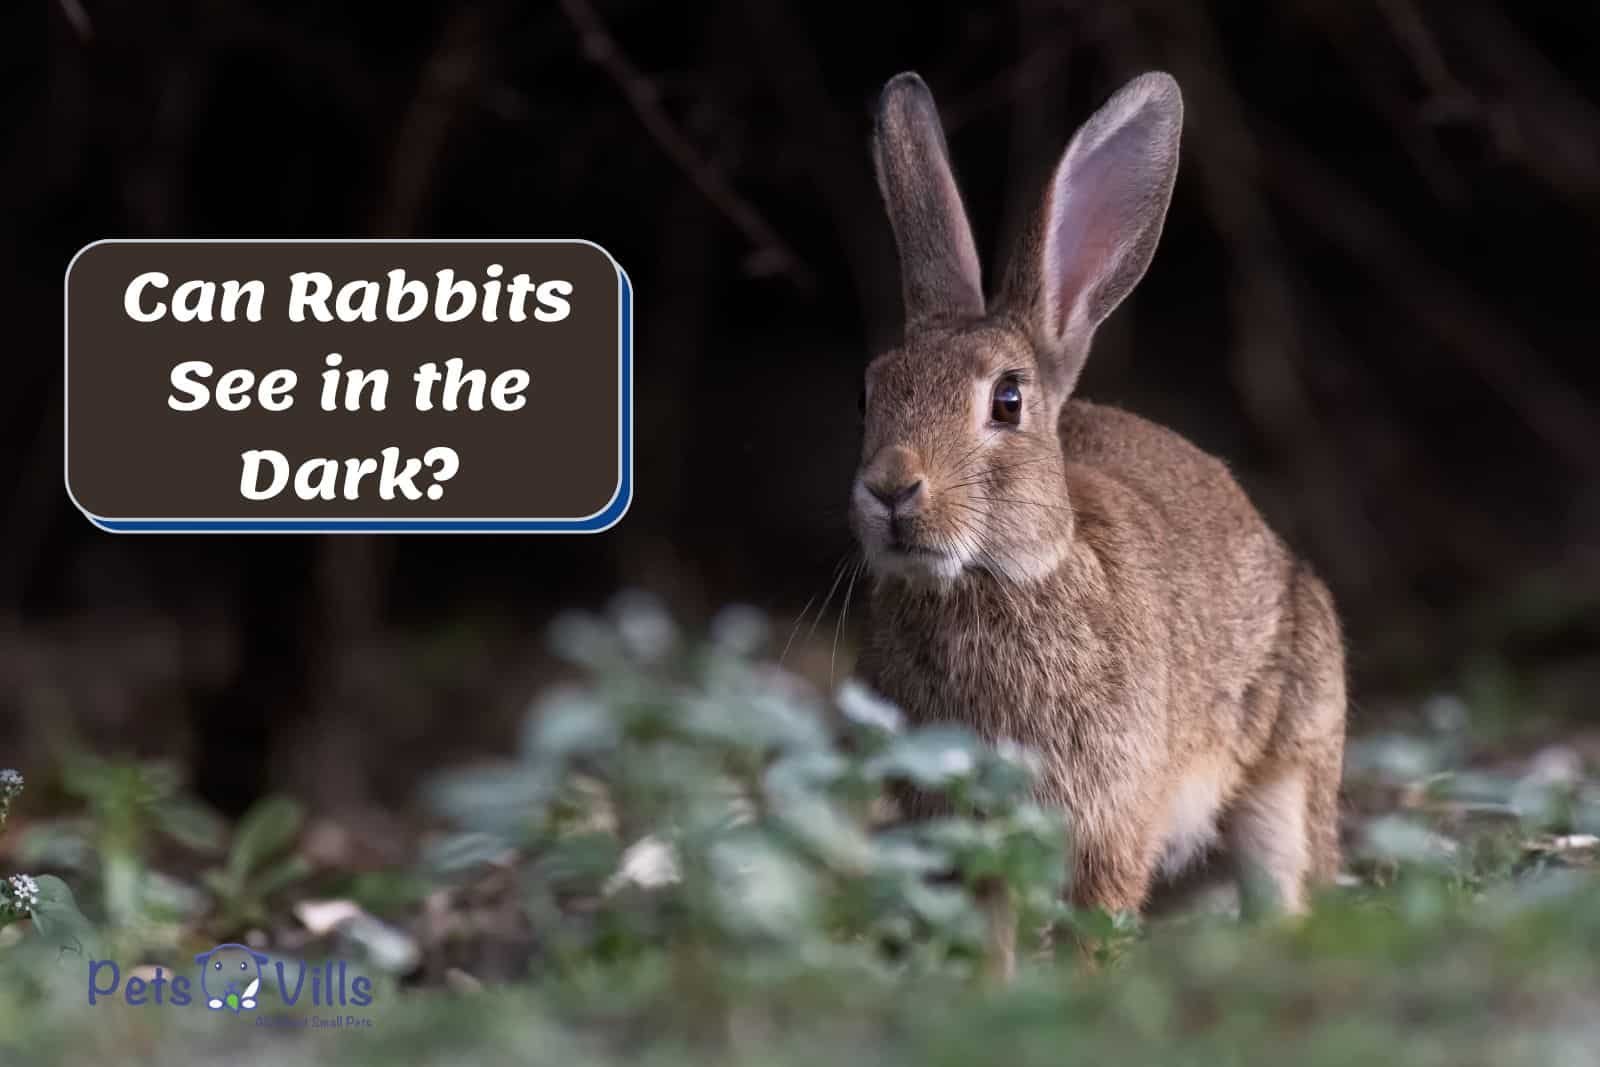 Rabbit roaming at night but Can Rabbits See in the Dark?